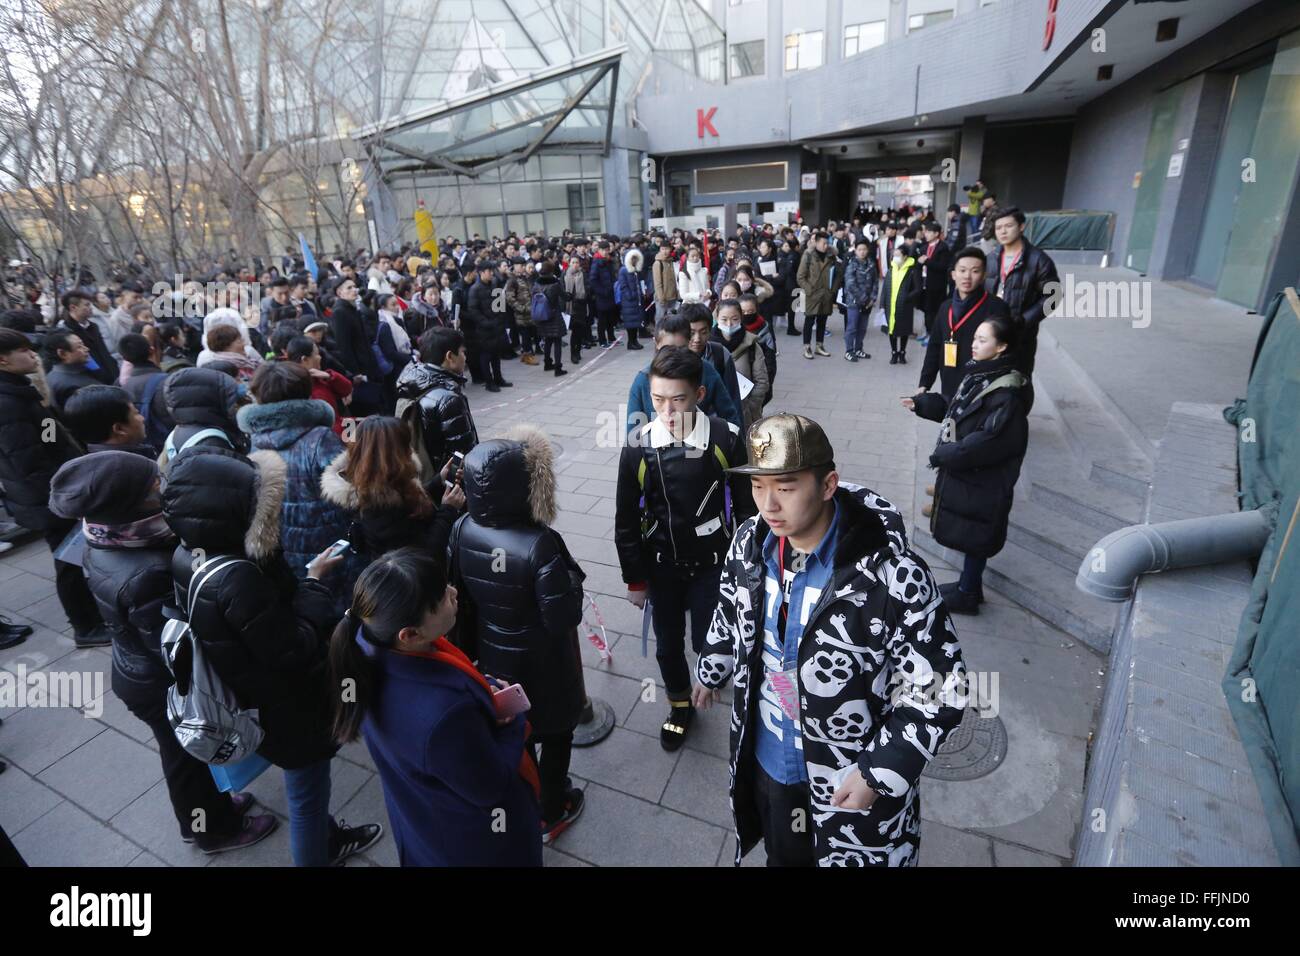 Beijing, China. 15th Feb, 2016. Candidates queue to enter the examination hall at Beijing Film Academy (BFA) in Beijing, capital of China, Feb. 15, 2016. The annual entrance exam of China's art colleges including BFA, the Central Academy of Drama and the Communication University of China started simultaneously on Monday. Over 7,600 applicants for BFA's performance institute will take part in the exam to vie for 45 vacancies in the institute. Some Chinese young people regarded studying in an art college as a shortcut to become famous in recent years. © Shen Bohan/Xinhua/Alamy Live News Stock Photo